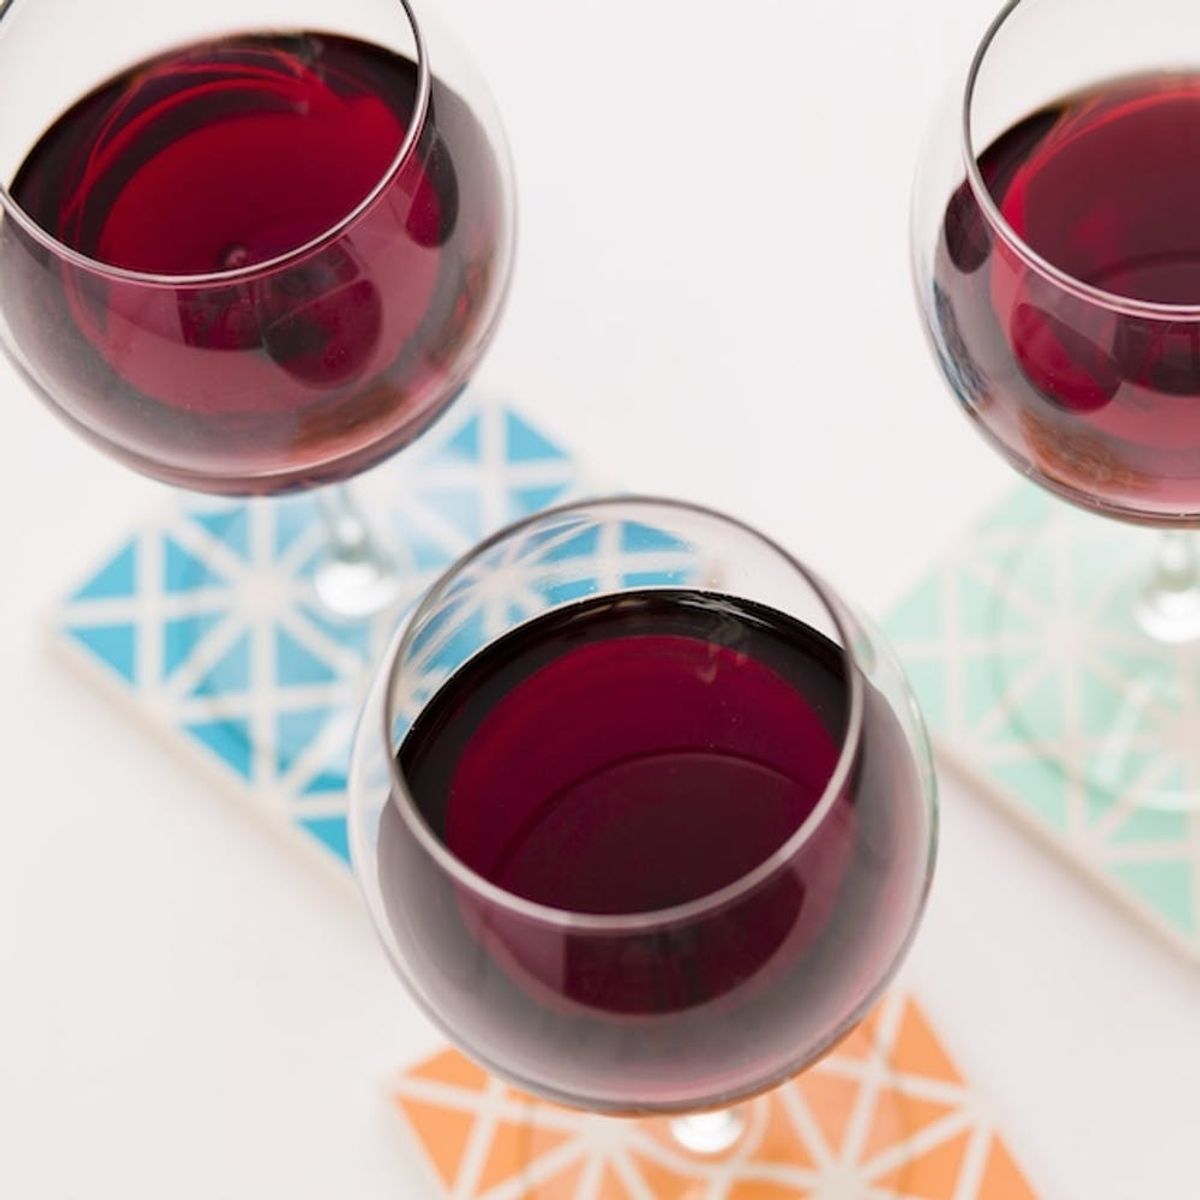 This Life-Saving Tech Was Inspired by Boxed Wine